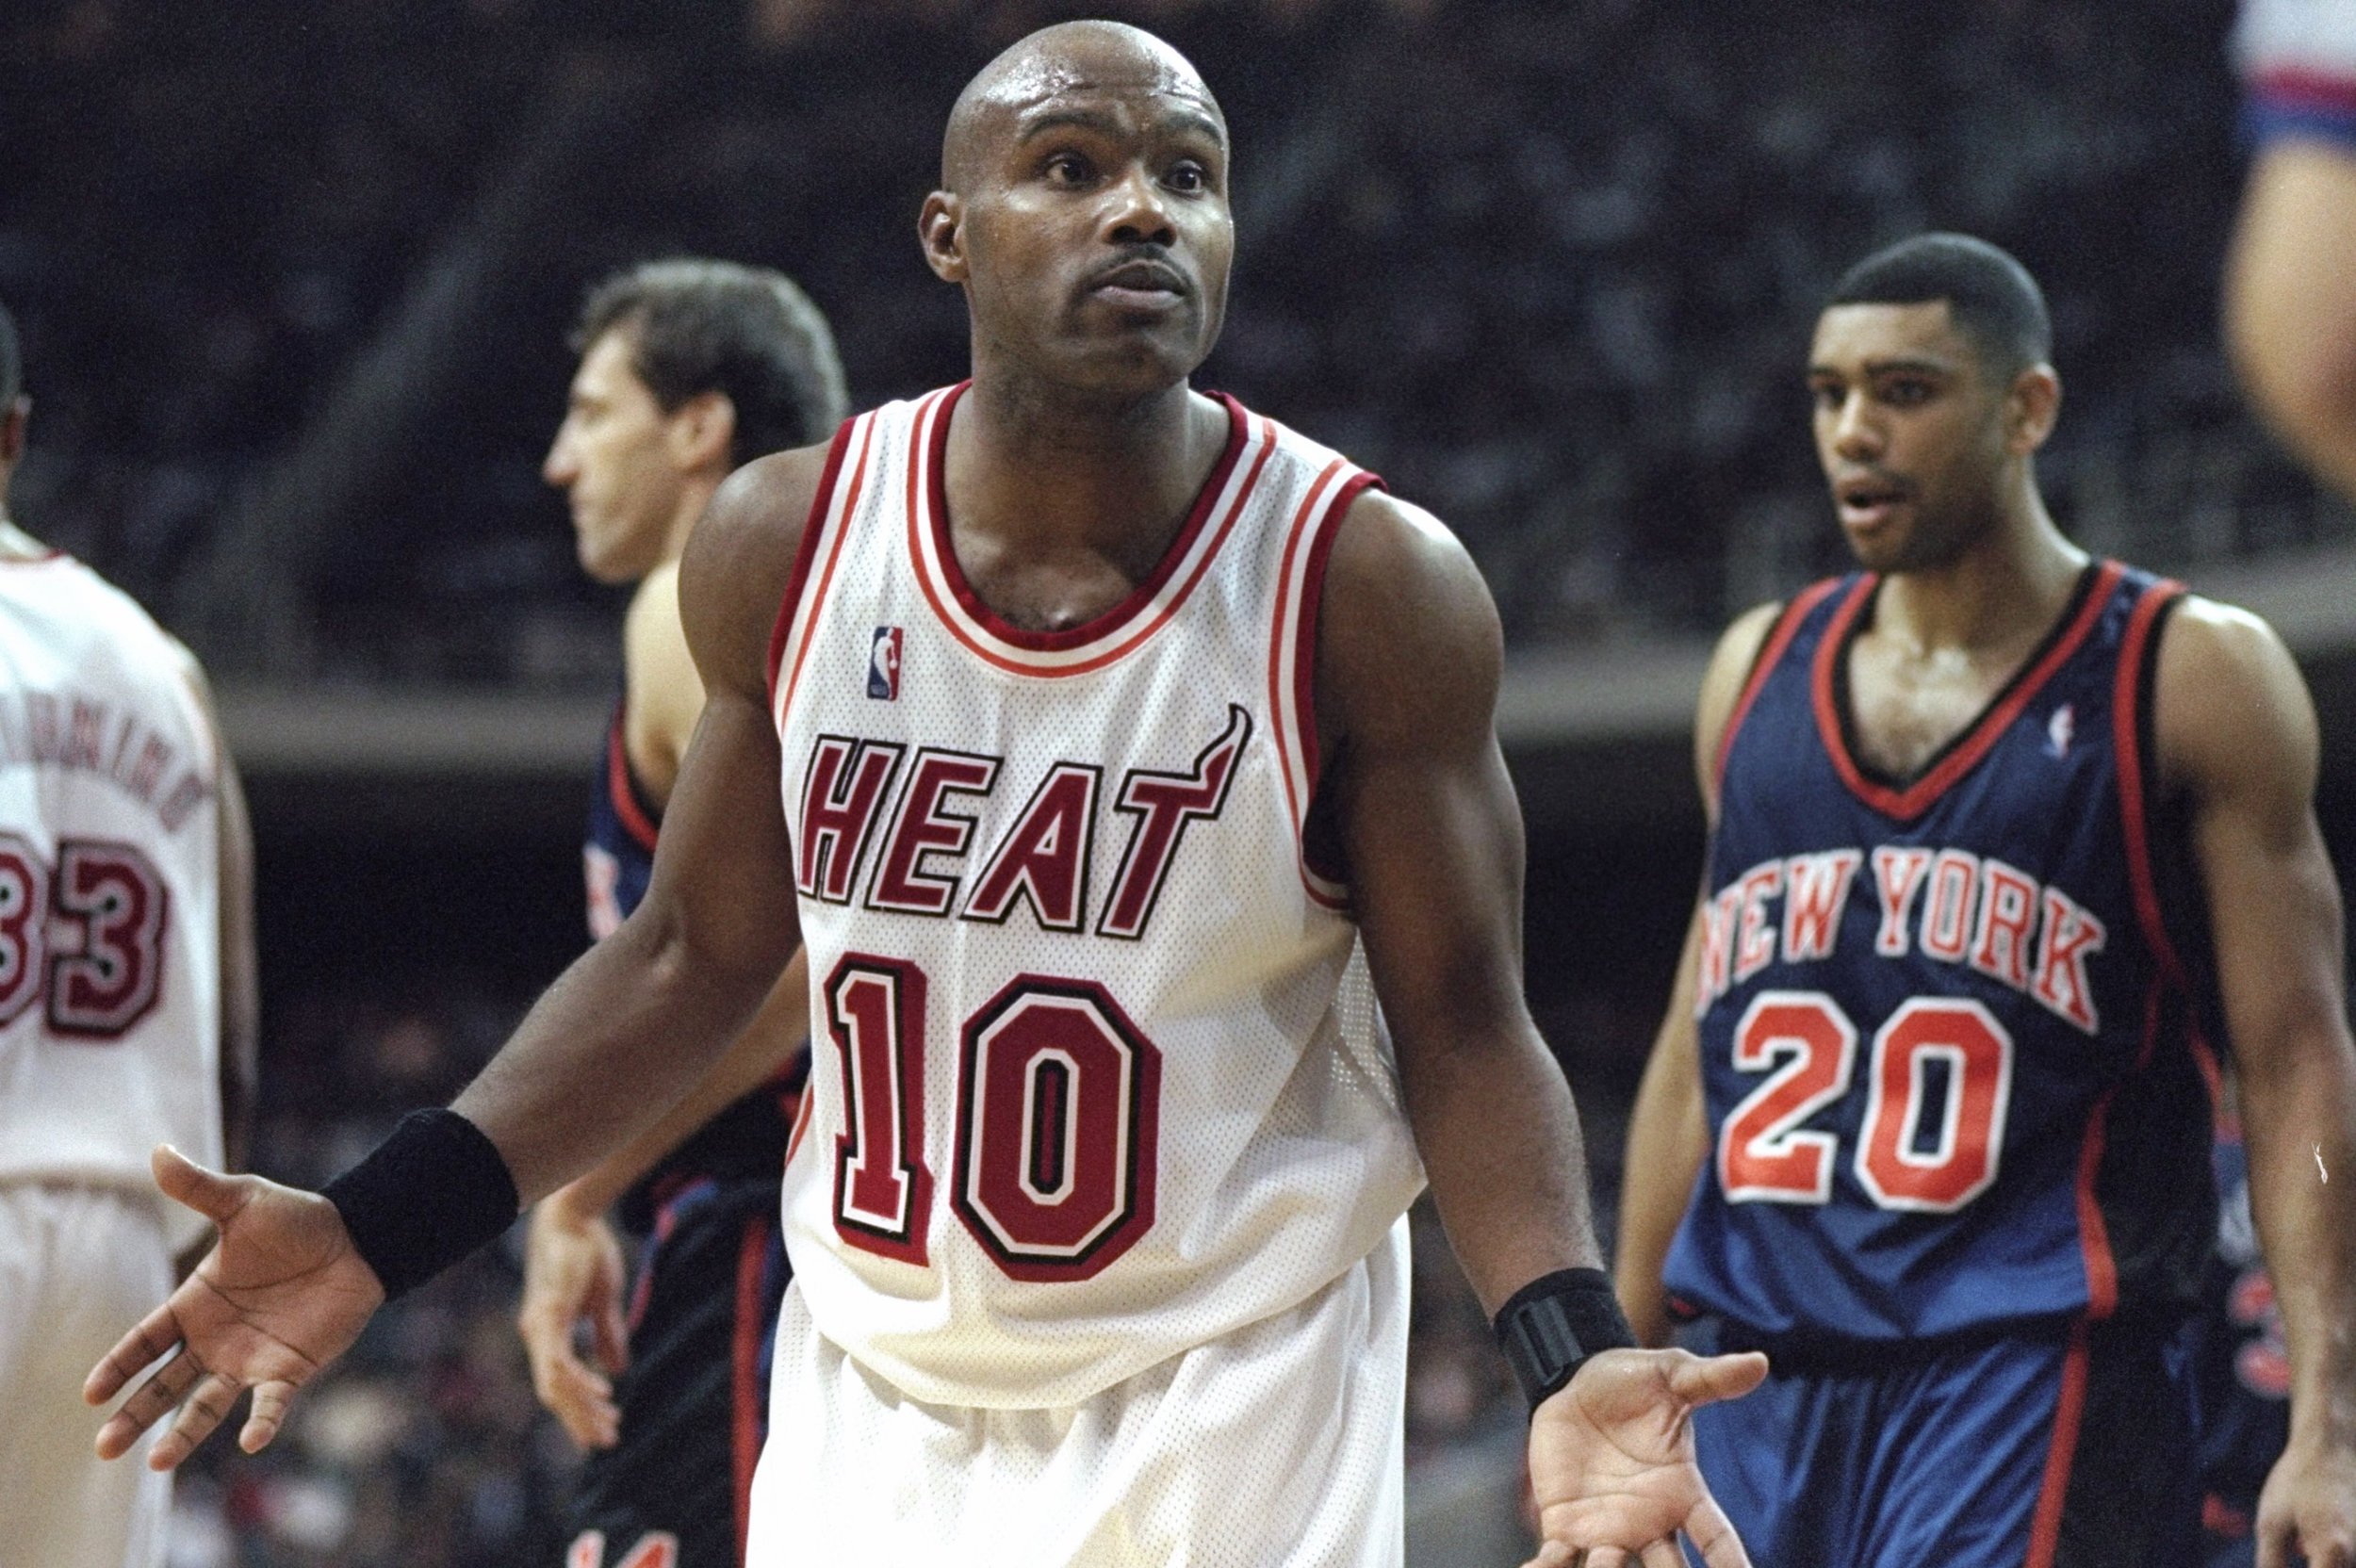 Tim Hardaway Showed the Proper Way to Apologize After His Homophobic  Comments